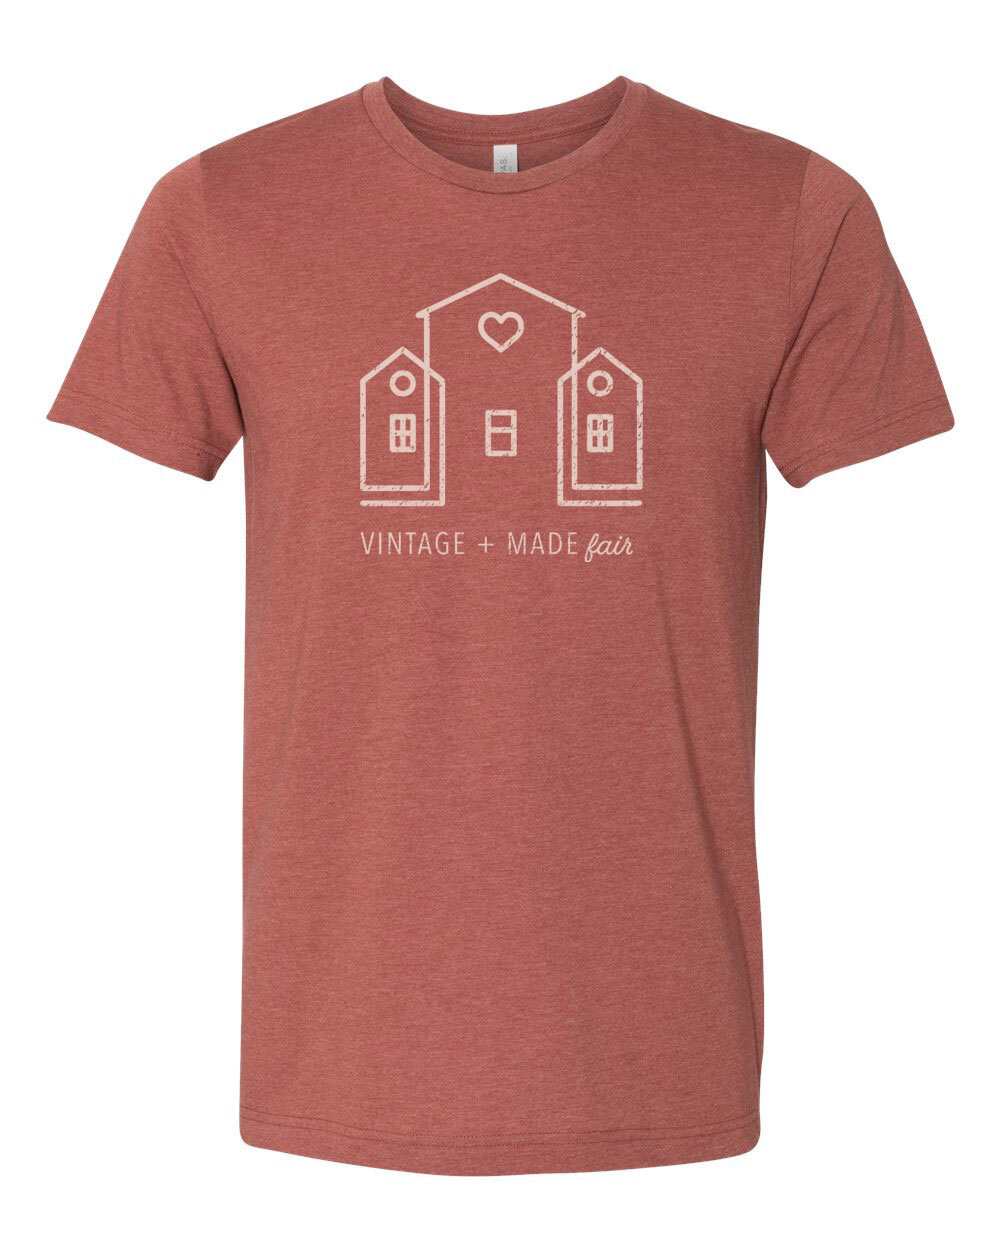 Home T-Shirt — Vintage and Made Fair